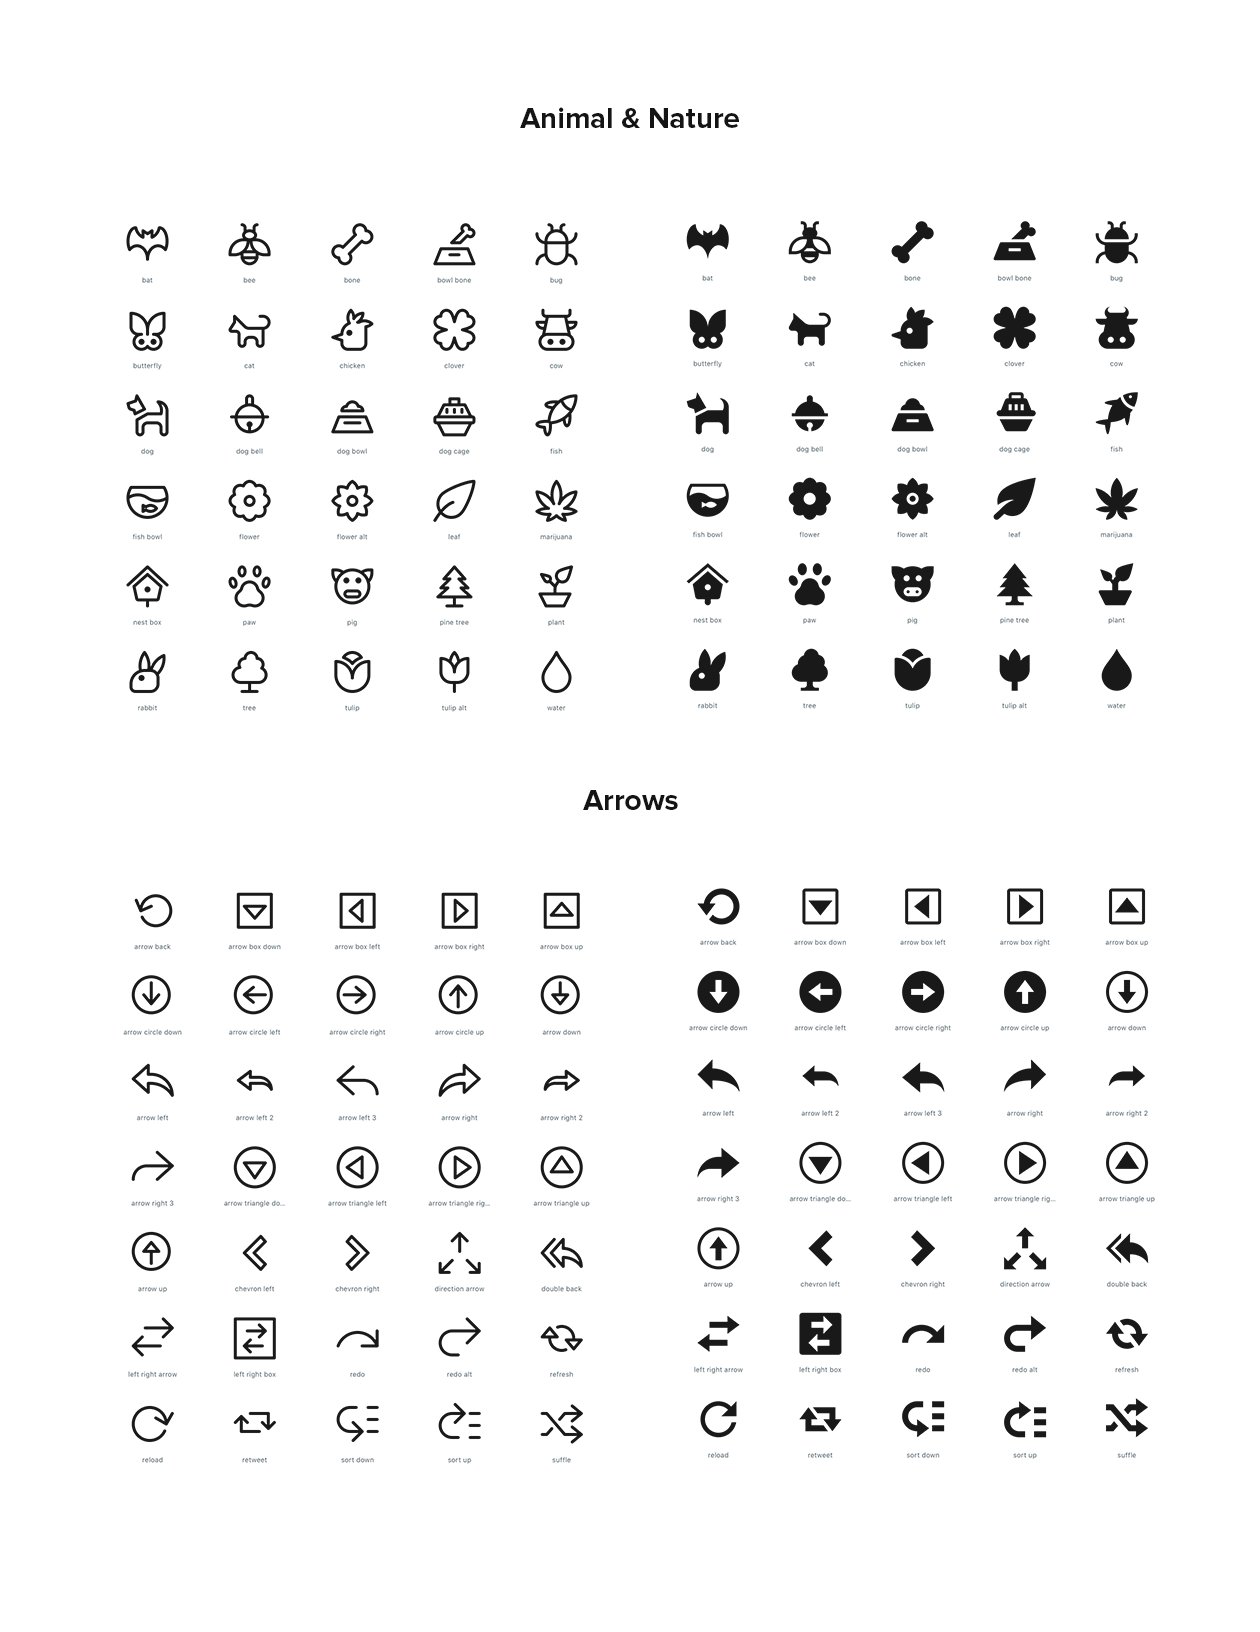 Animal and nature icons.